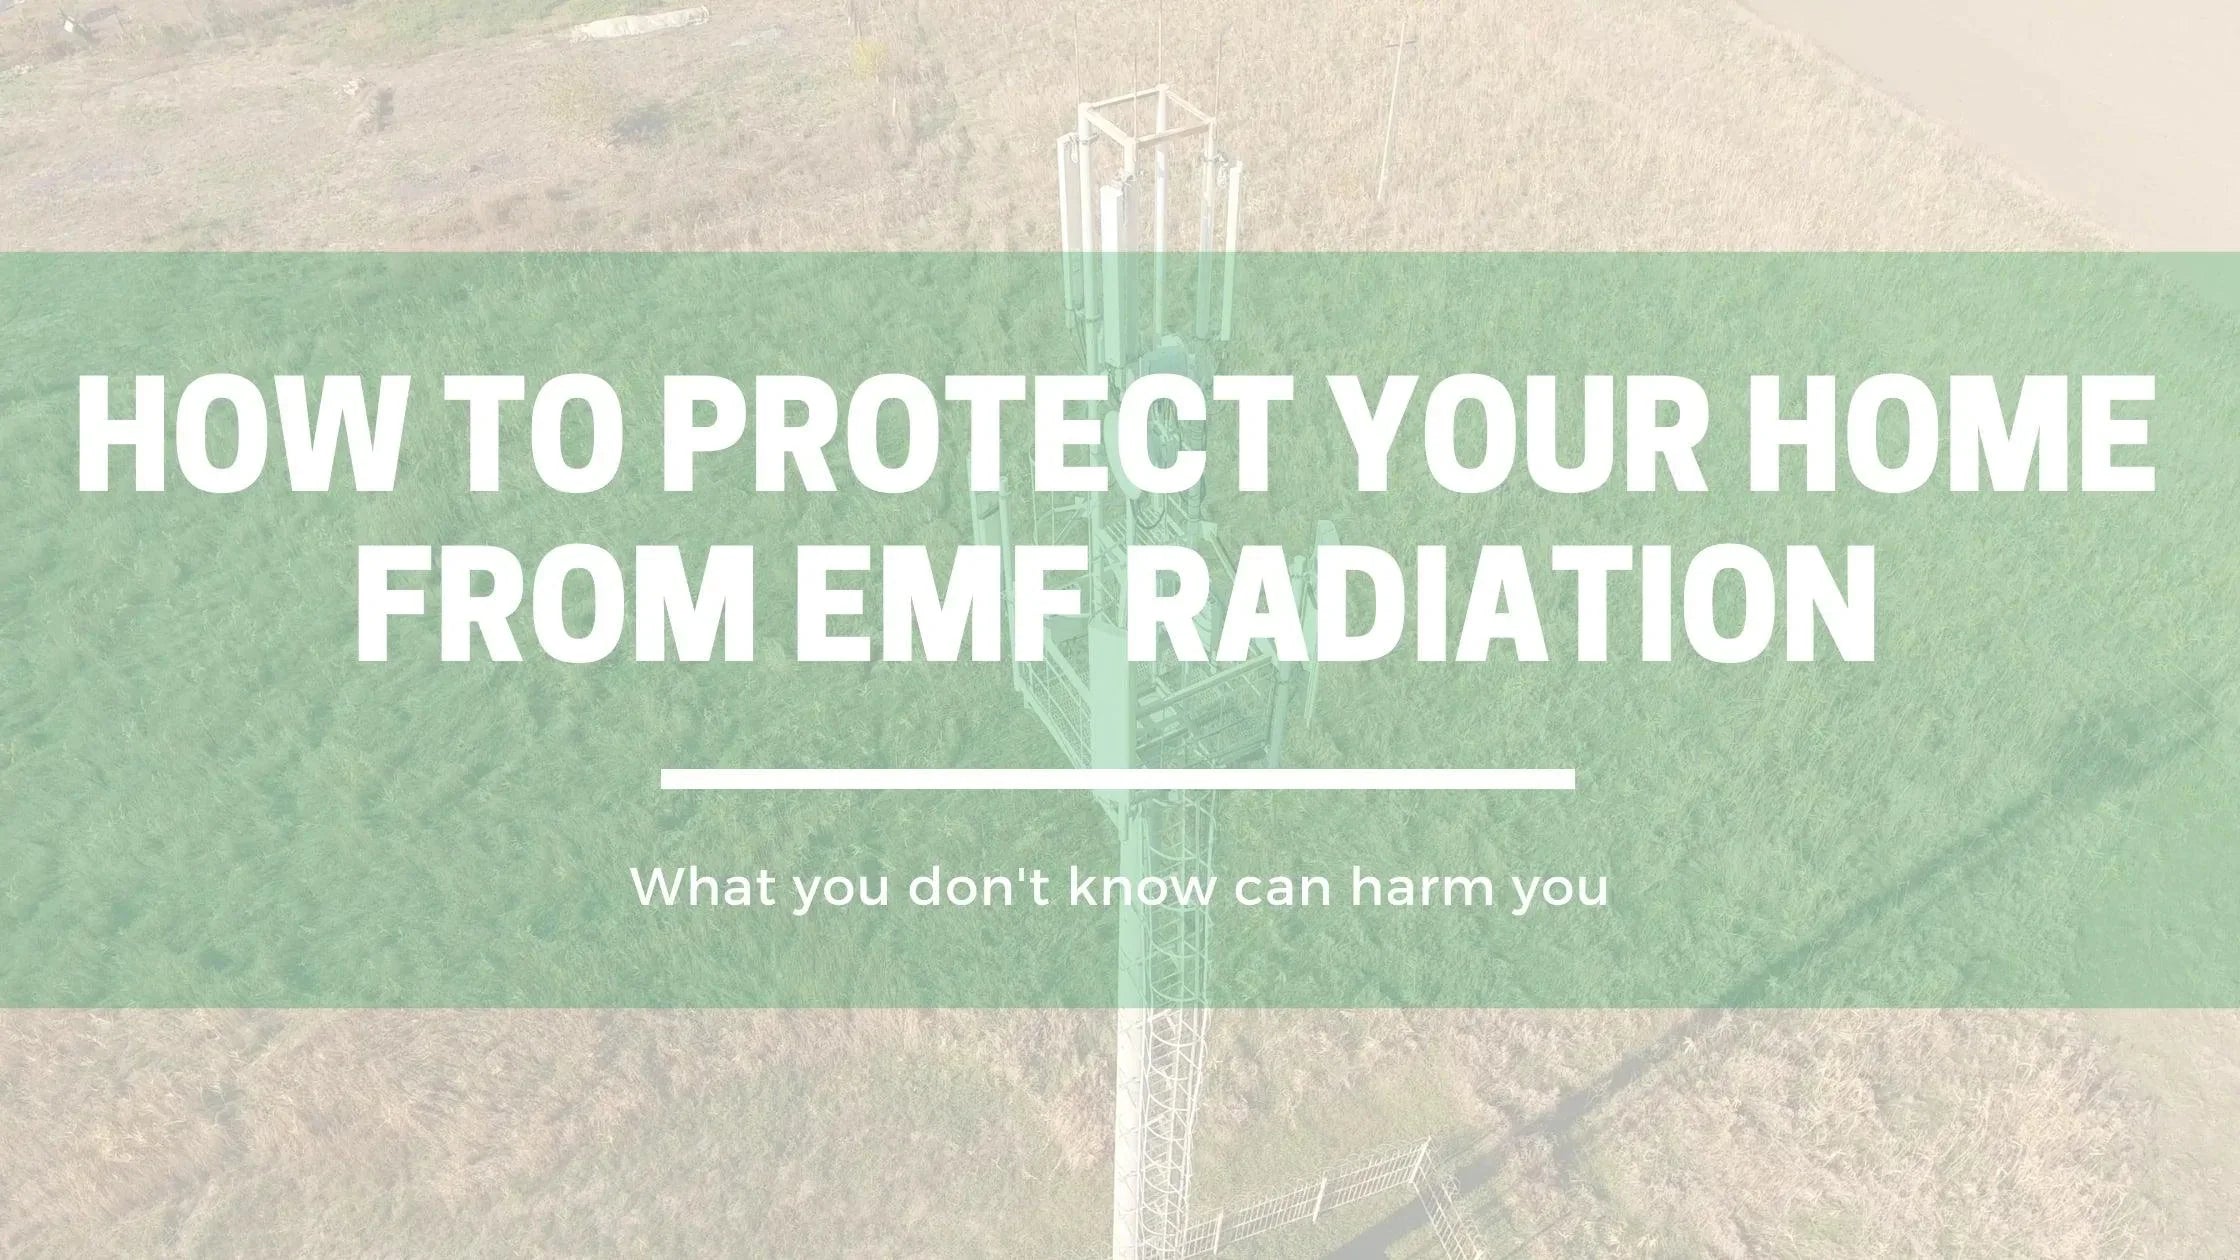 Common EMF Sources Found In Homes - and EMF Blockers